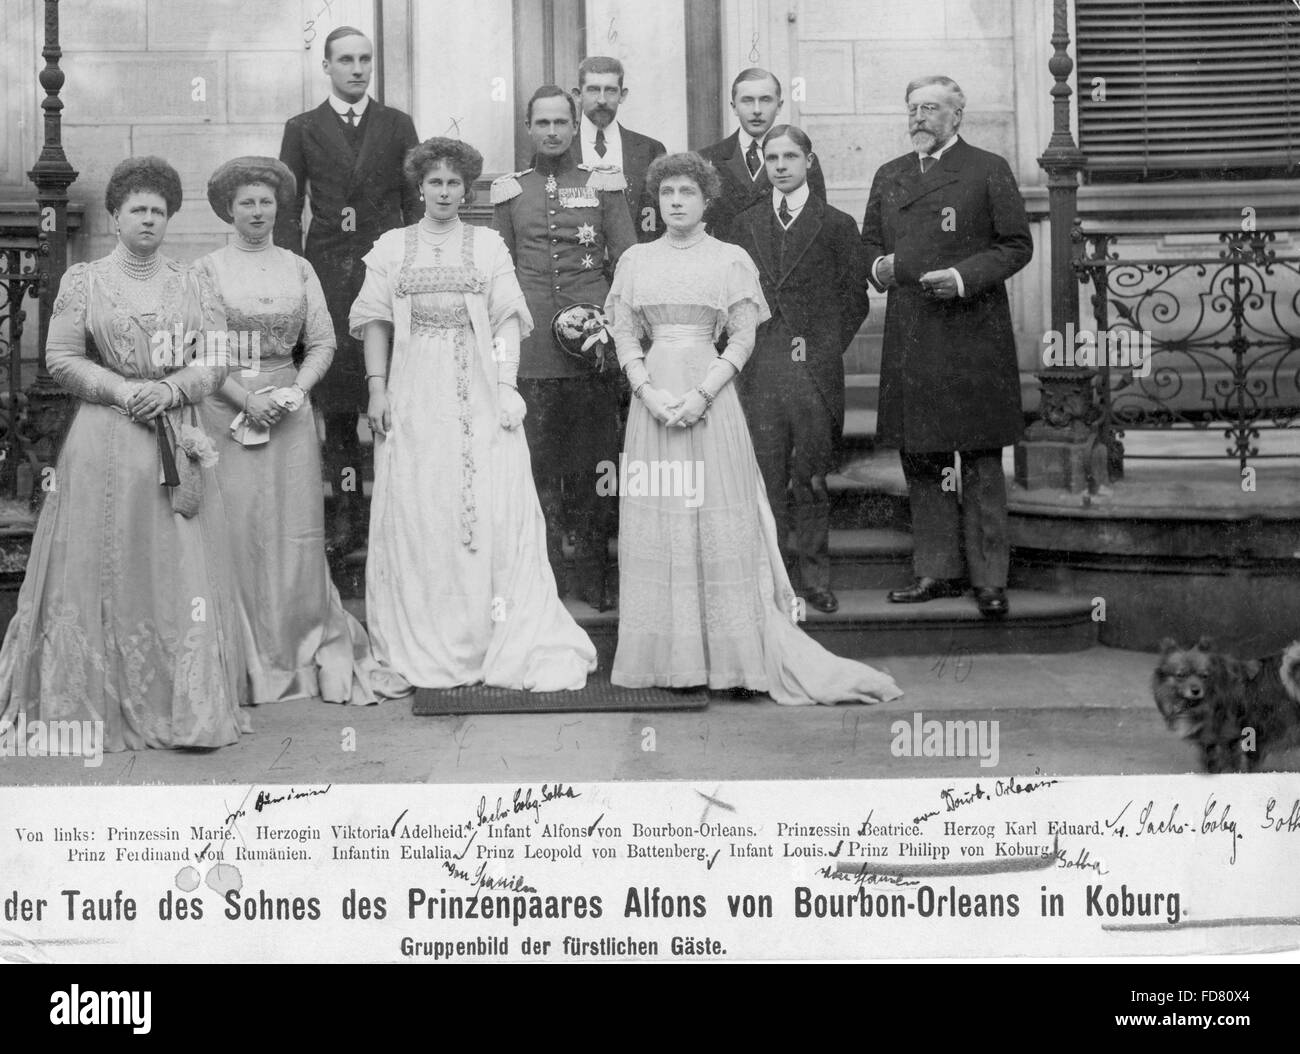 Guests at the baptism of Alvaro, son of Alfonso of Bourbon-Orleans, 1910 Stock Photo